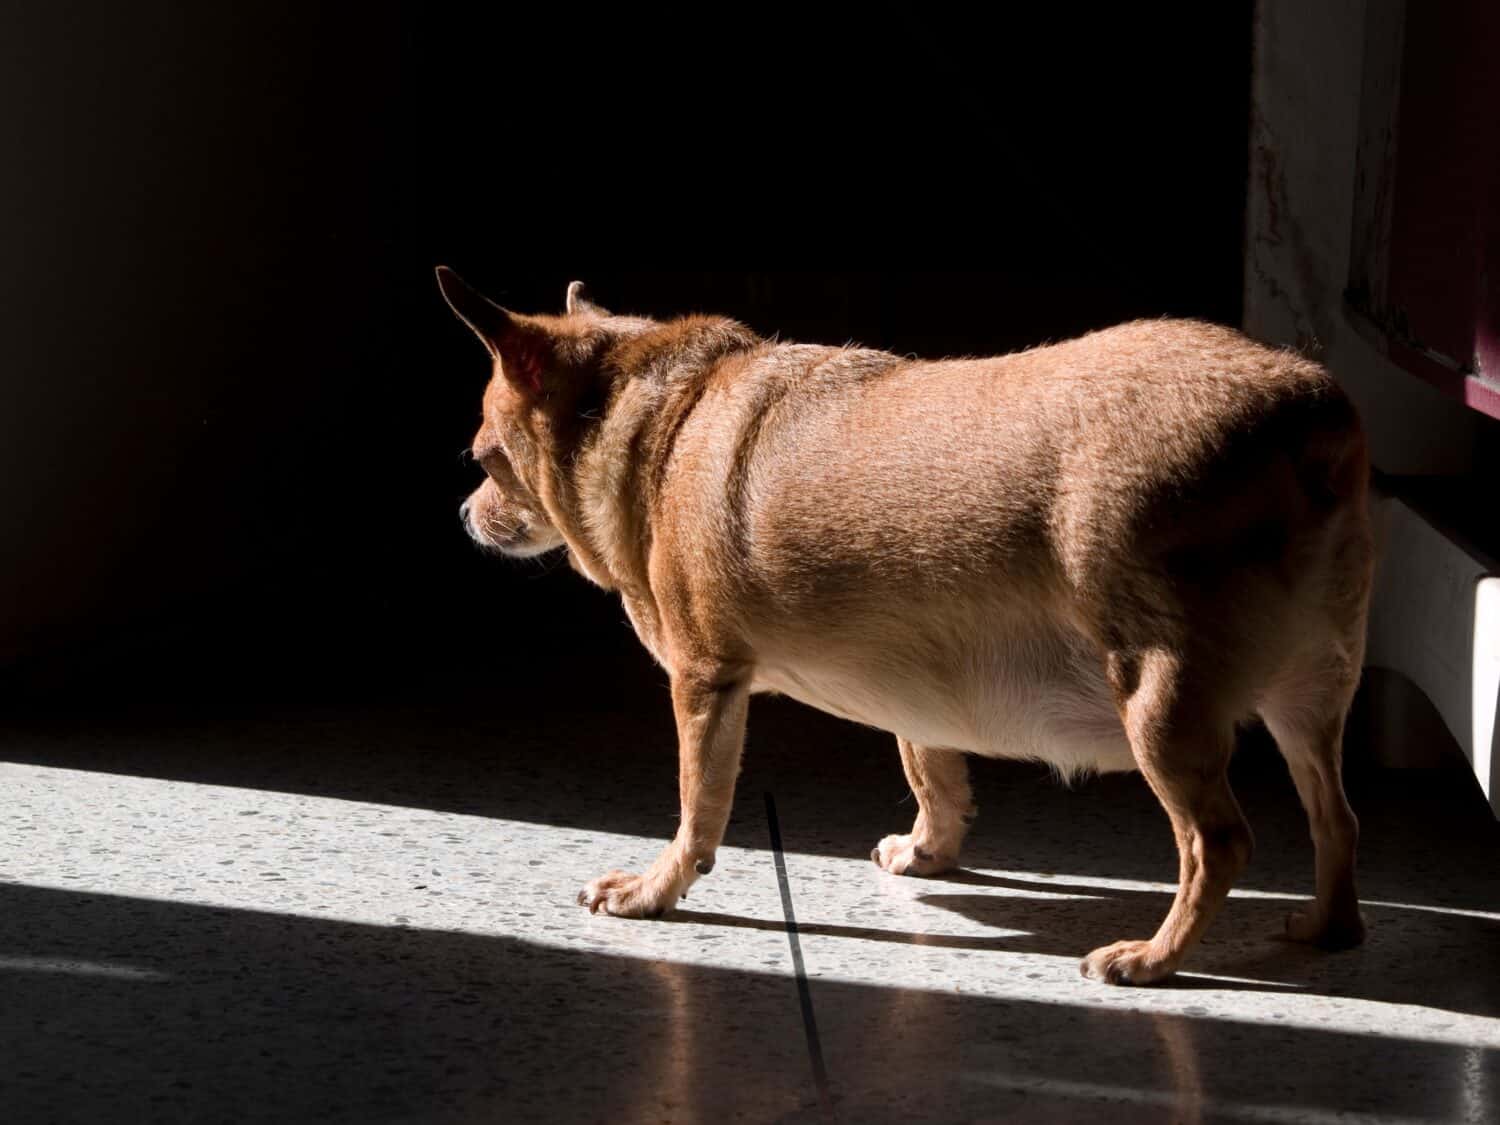 Fat pregnant Chihuahua dog standing on the floor in morning light